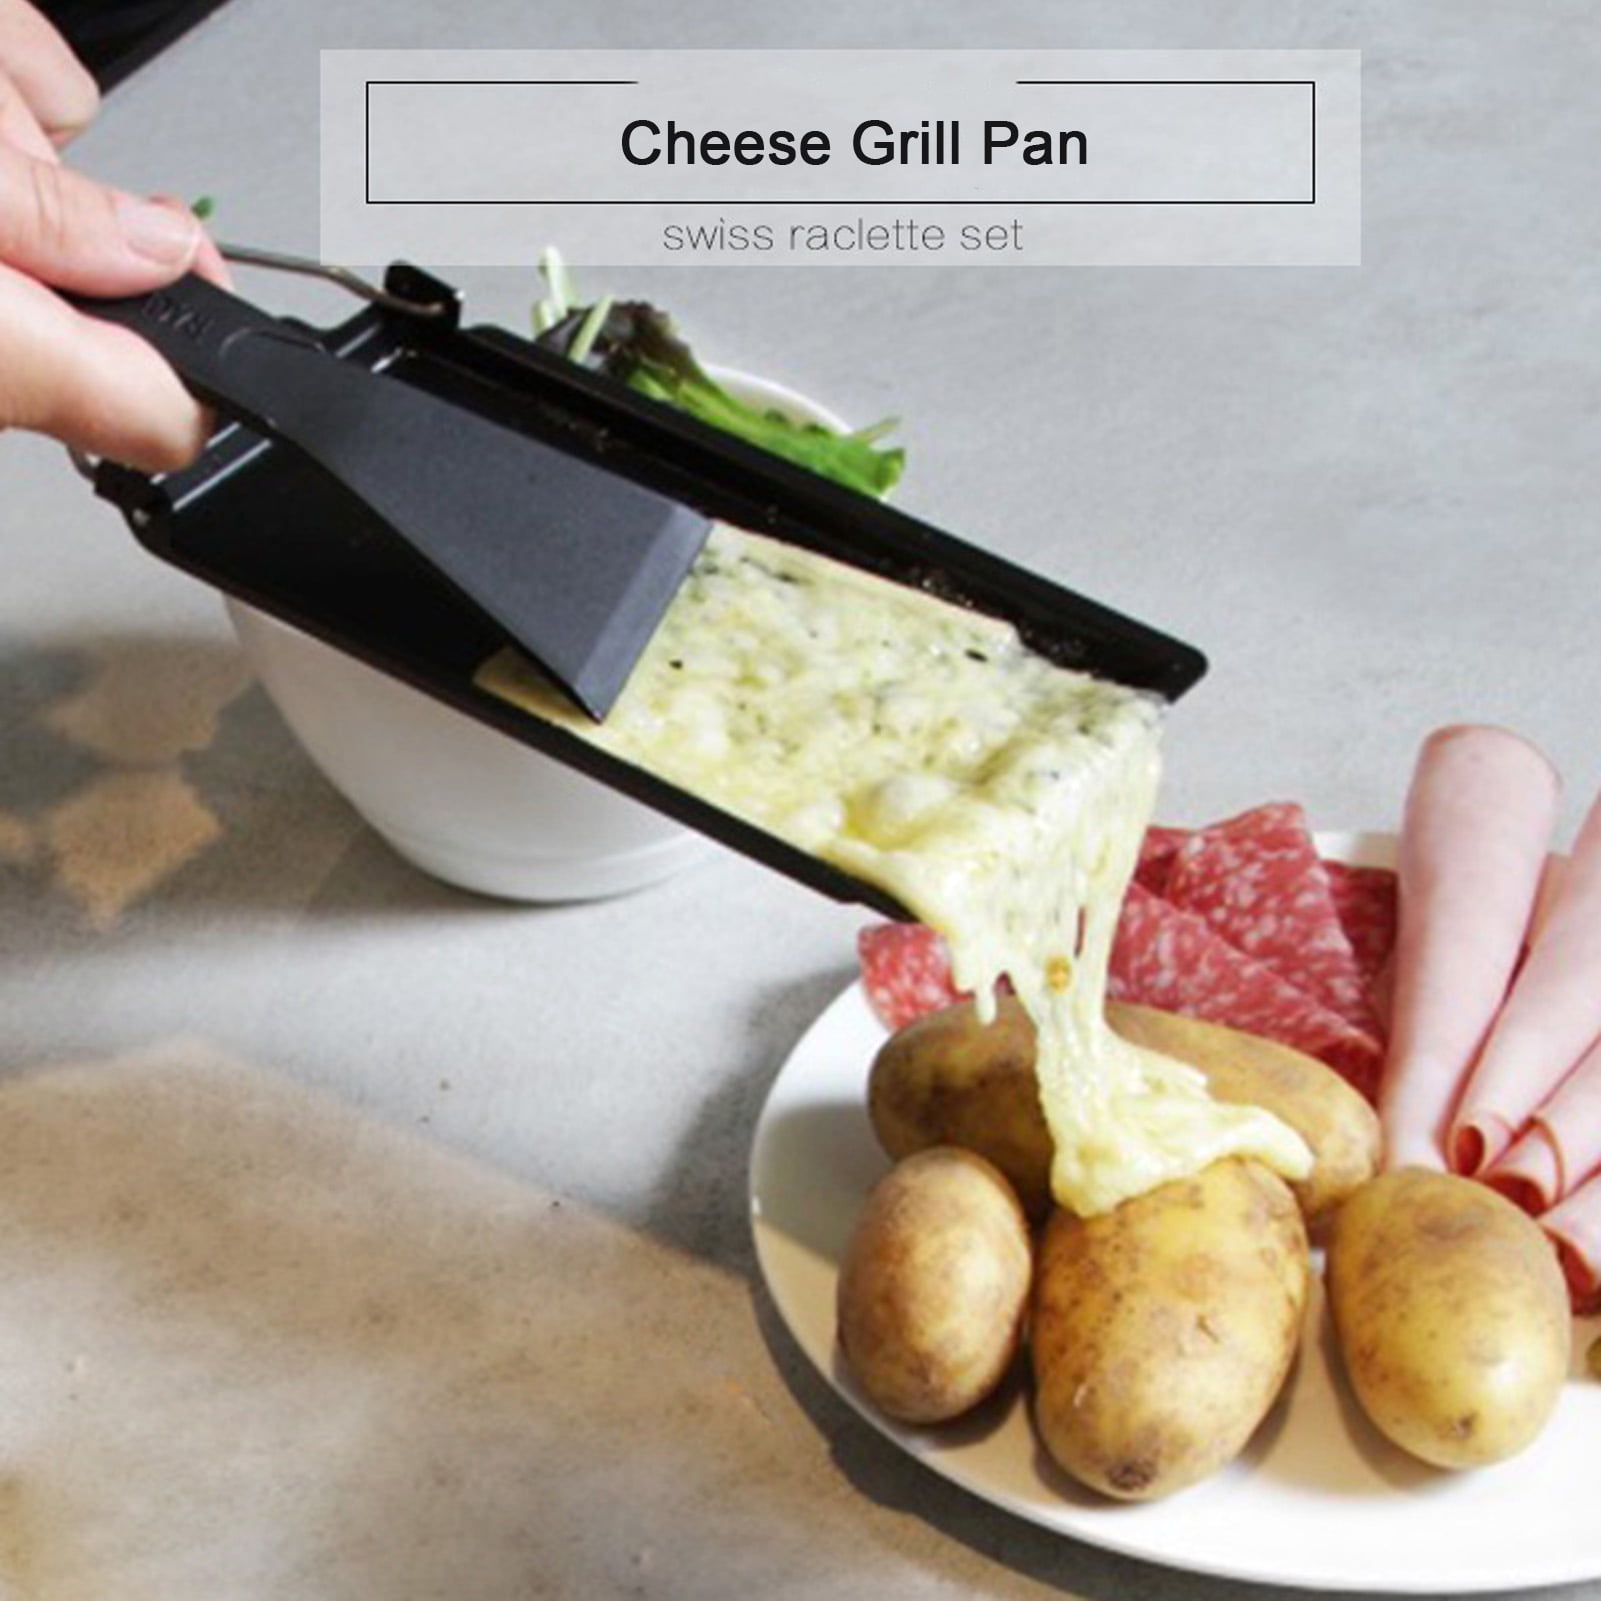  Mini Cheese Raclette, Portable Foldable Non-Stick Raclette  Grill, Candlelight Cheese Melter Pan, with Spatula : Acogedor: Home &  Kitchen